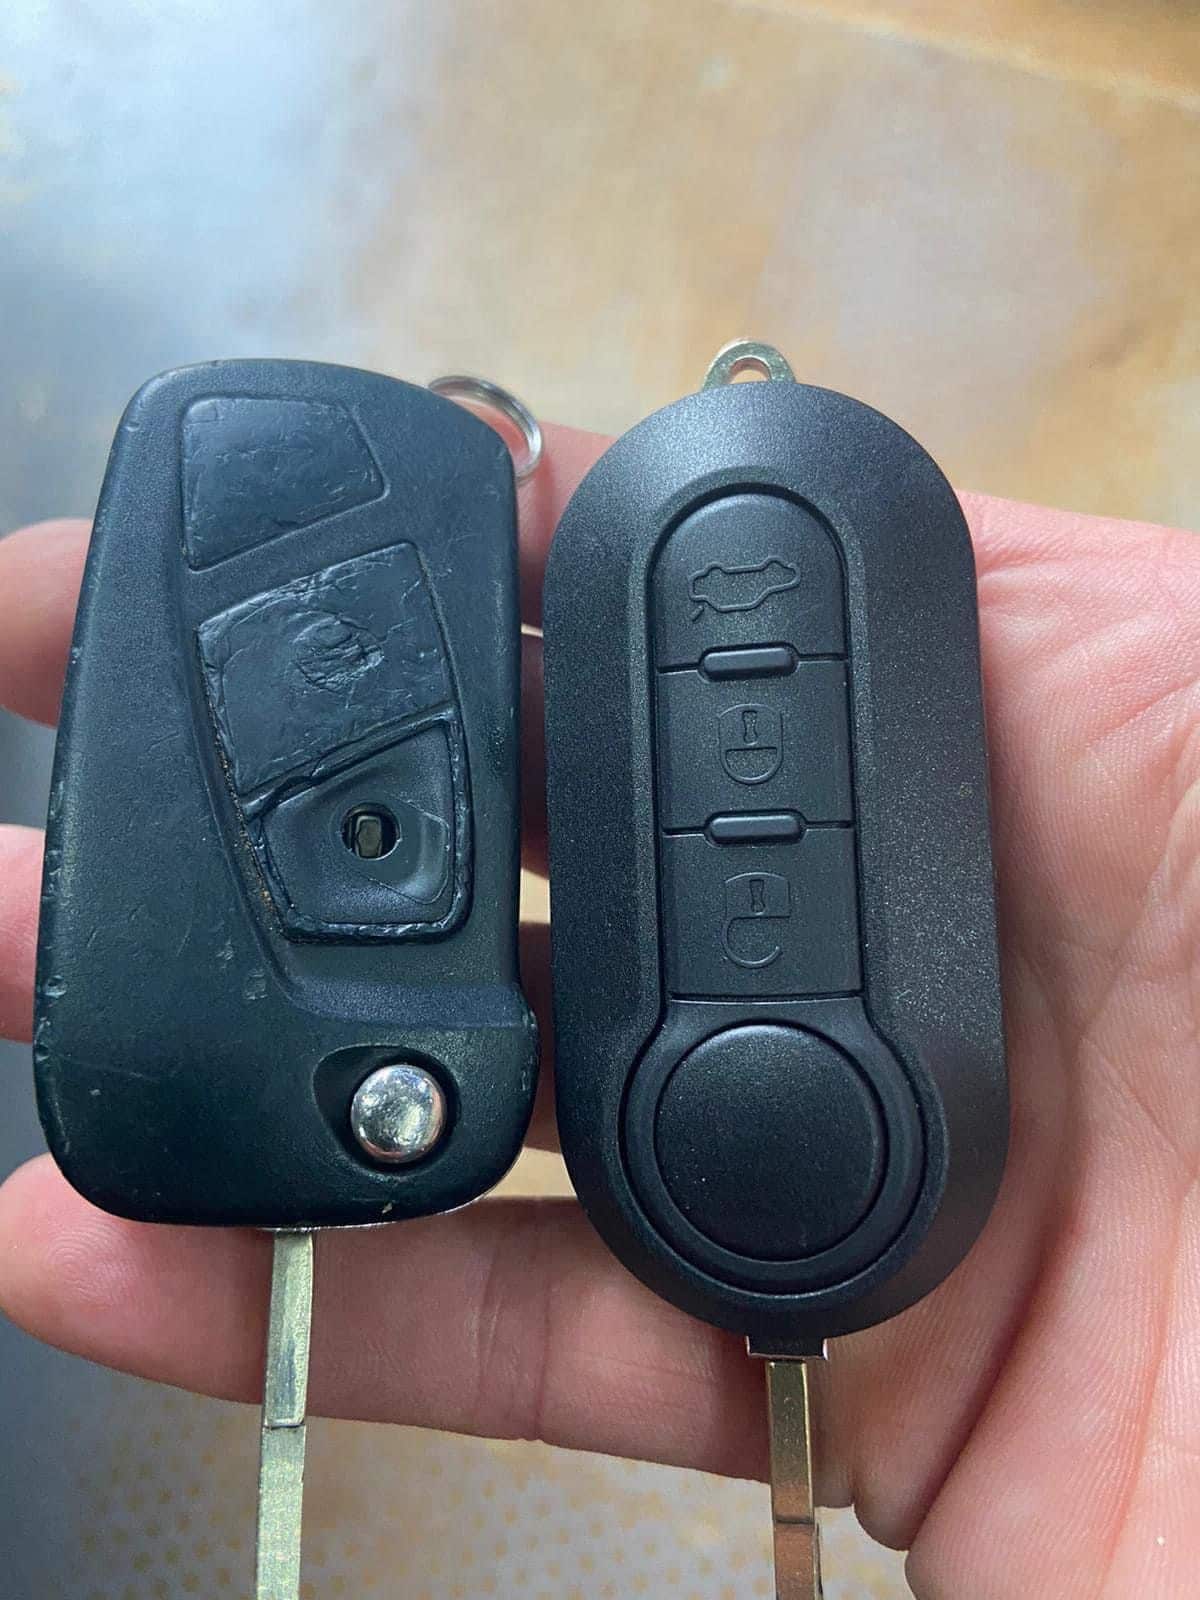 Fault car key fob fixed and replaced